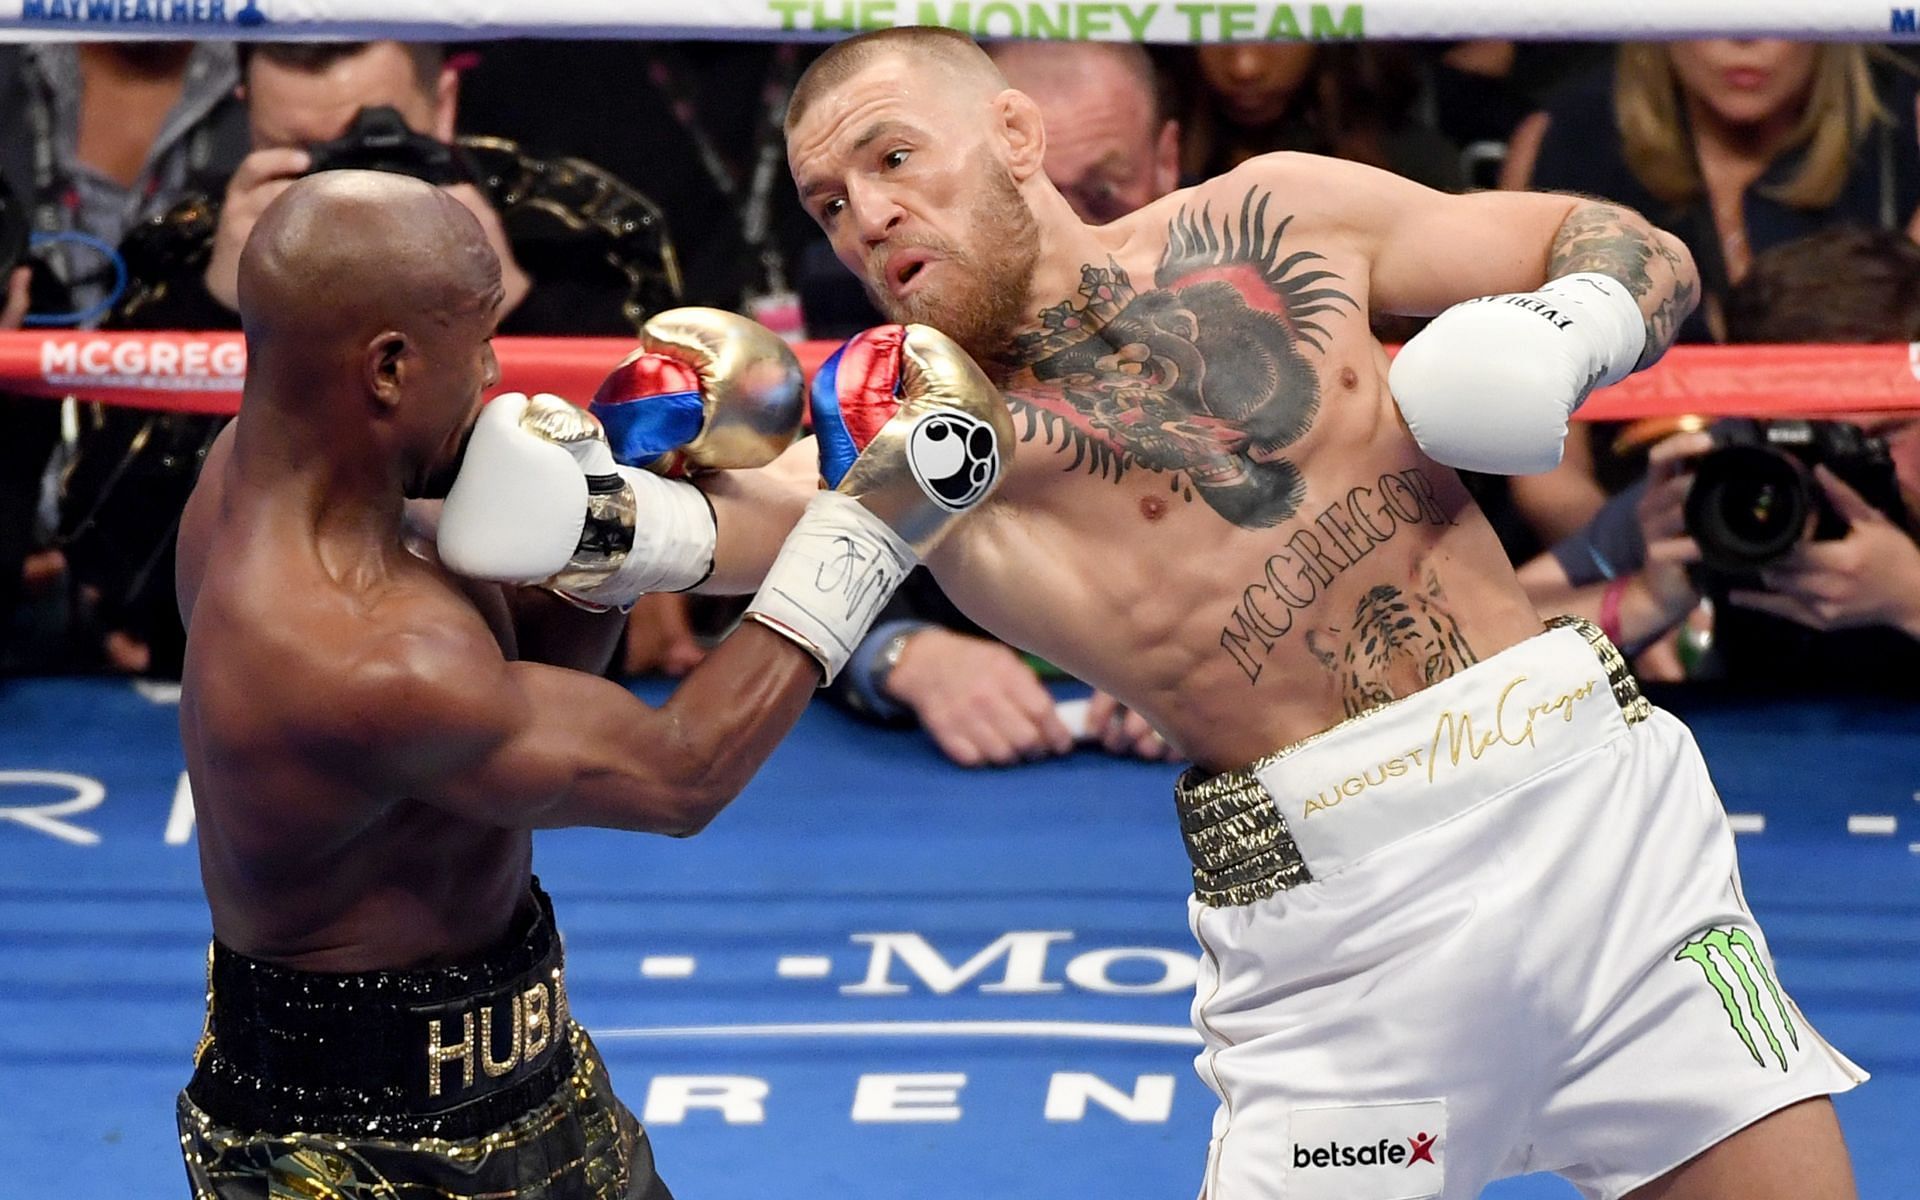 Will Floyd Mayweather really rematch Conor McGregor in the near future?